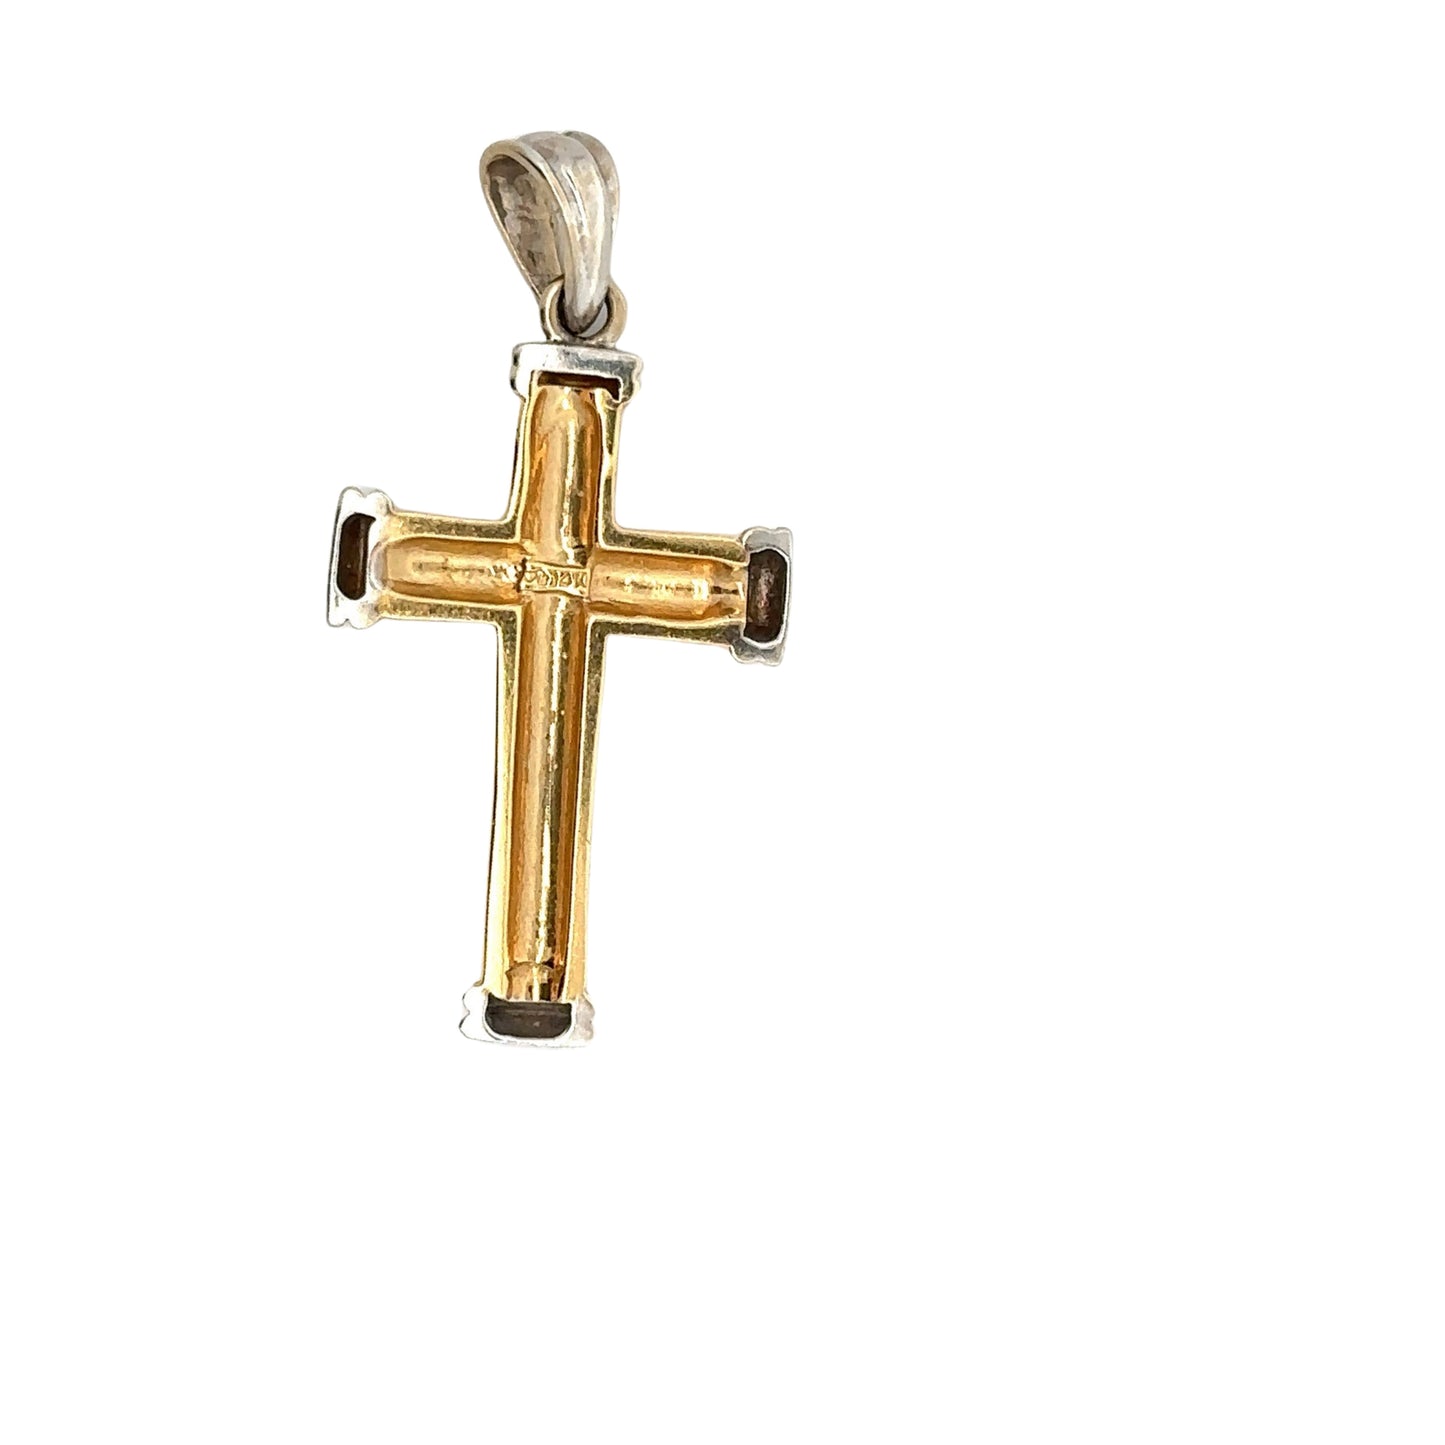 Back of yellow and white gold cross with hollow back, 14K stamp and scratches on gold